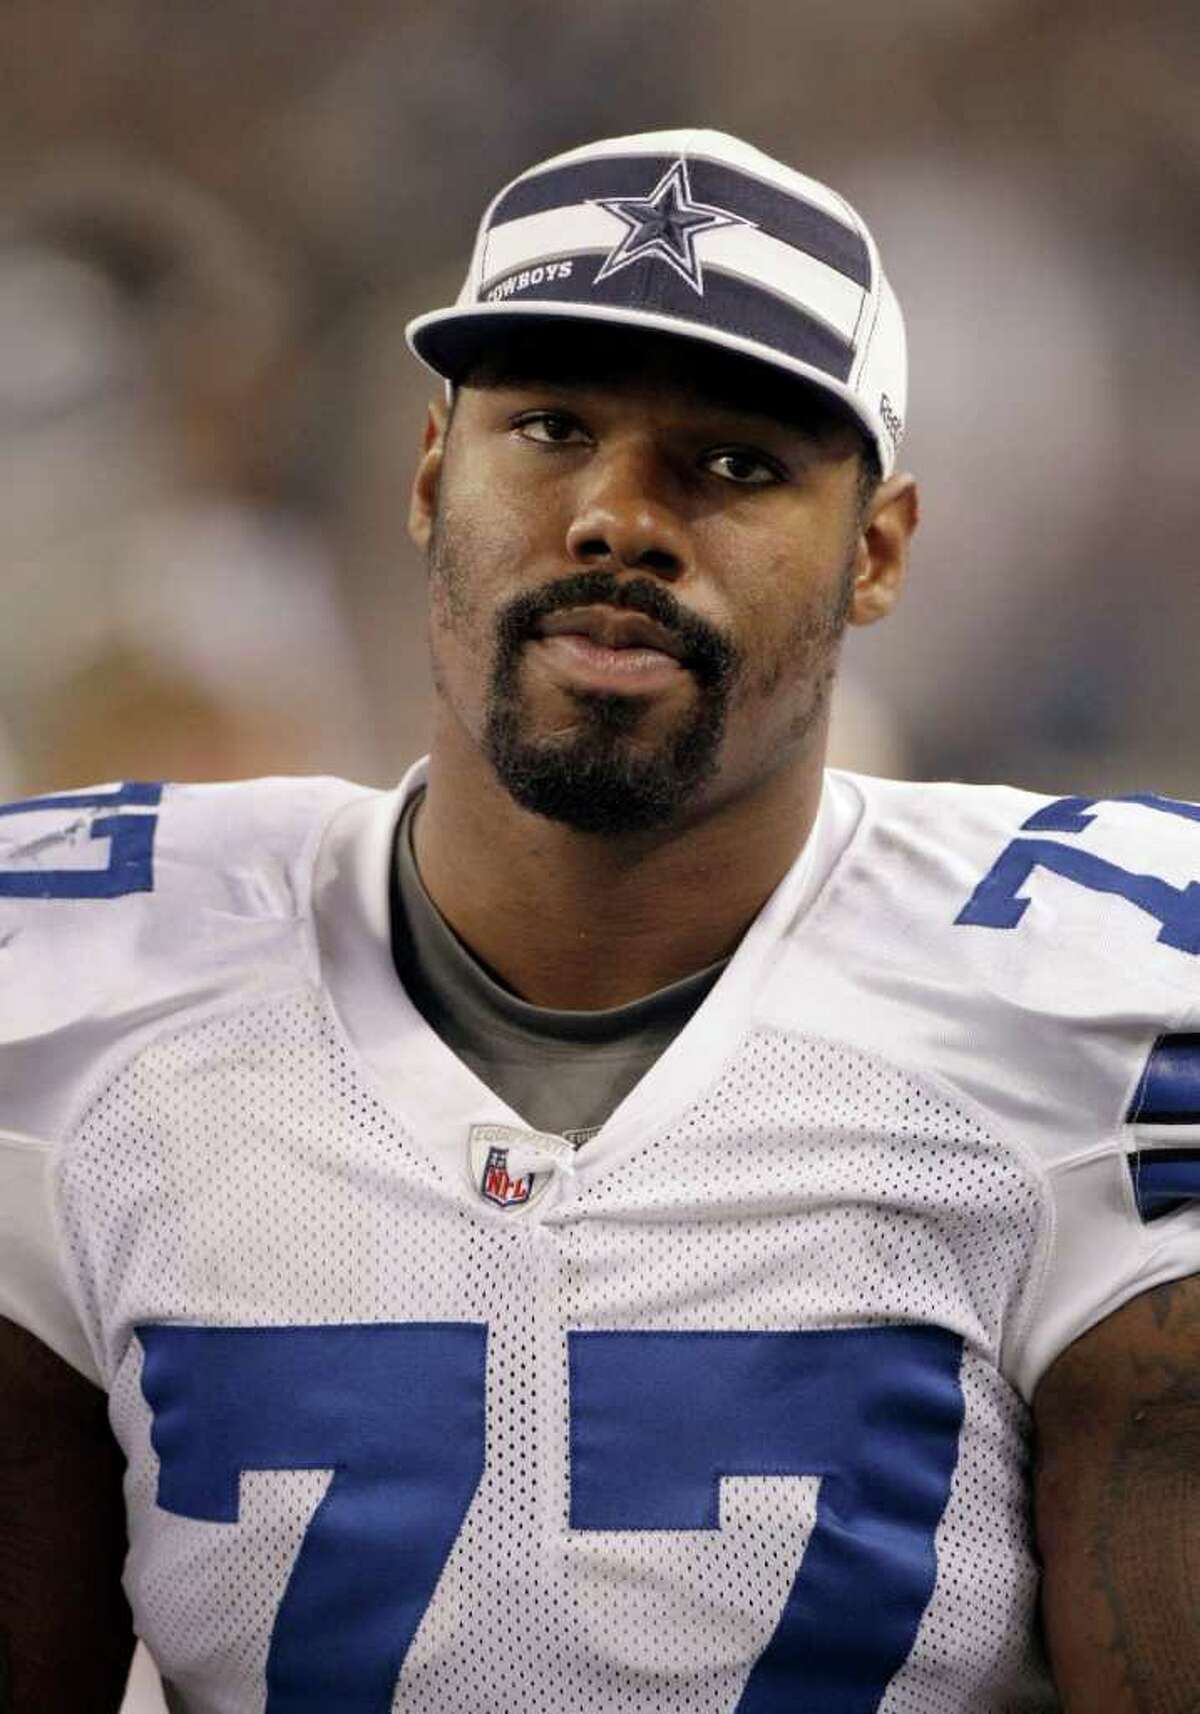 Dallas Cowboys' Tyron Smith is watches action against the Denver Broncos from the sideline during a preseason NFL football game Thursday, Aug. 11, 2011, in Arlington, Texas. (AP Photo/Tony Gutierrez)